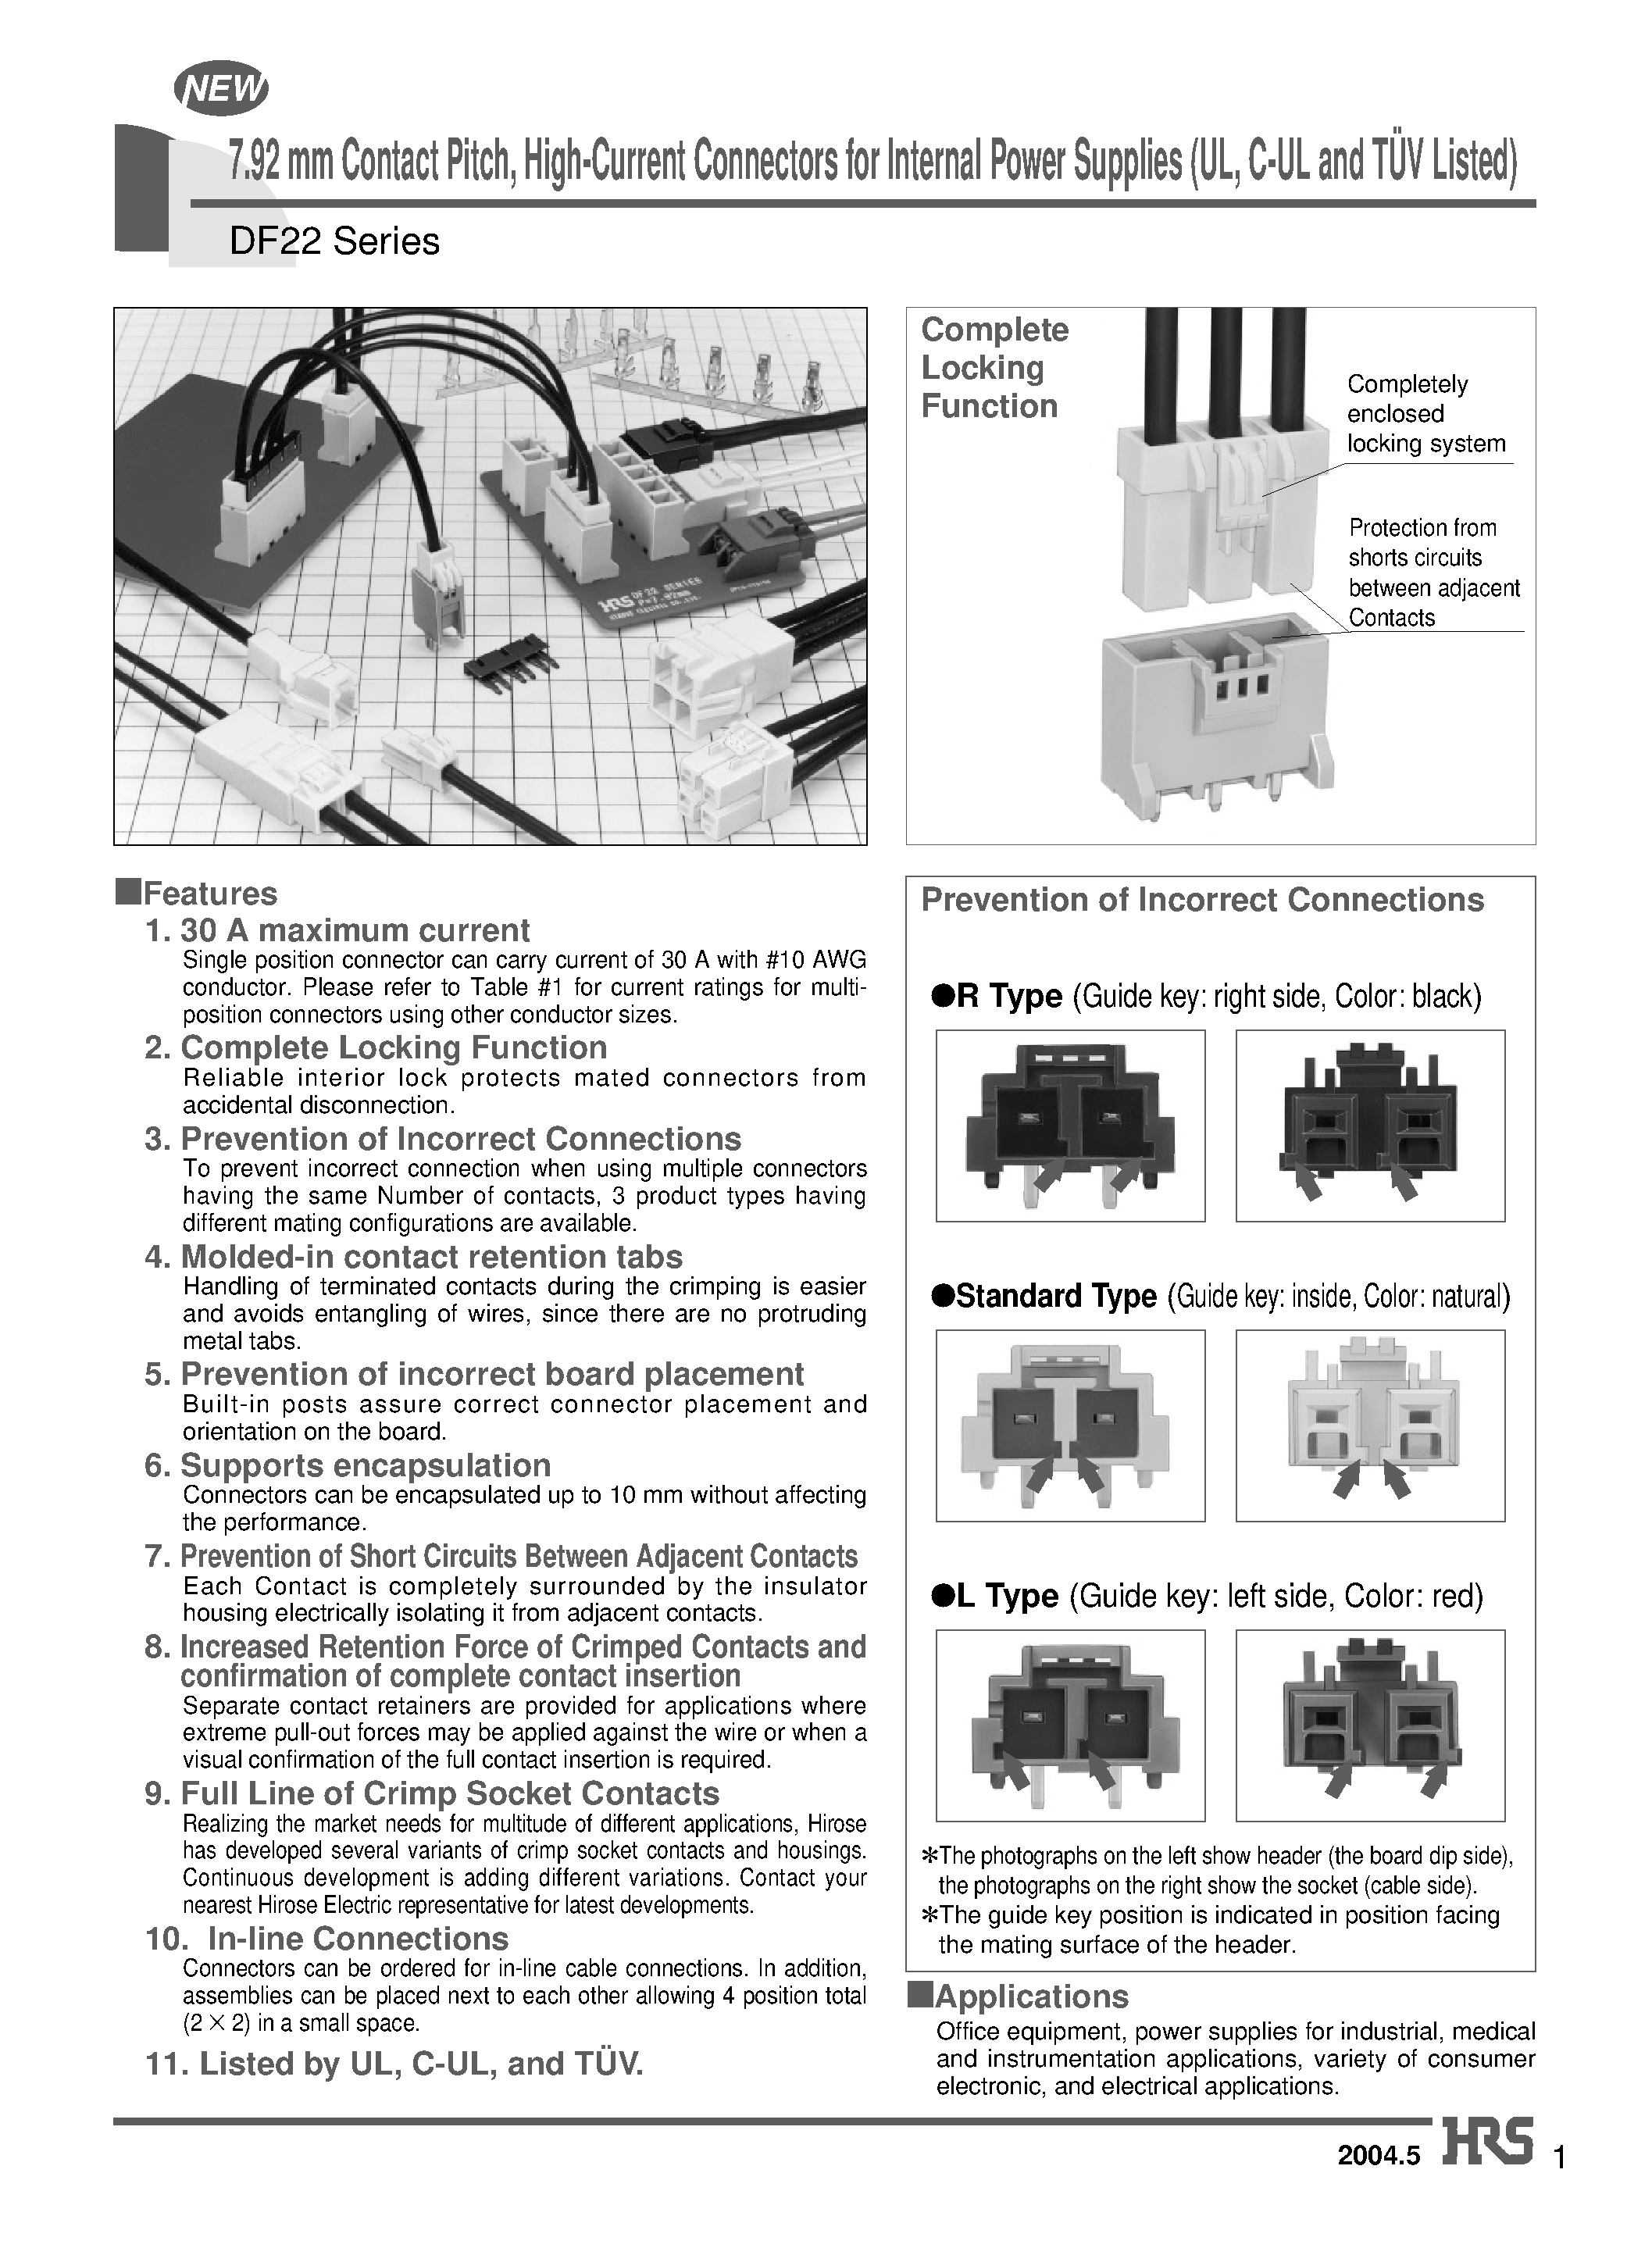 Datasheet DF22A-2P-7.92DSA - 7.92 mm Contact Pitch/ High-Current Connectors for Internal Power Supplies (UL/ C-UL and TUV Listed) page 1